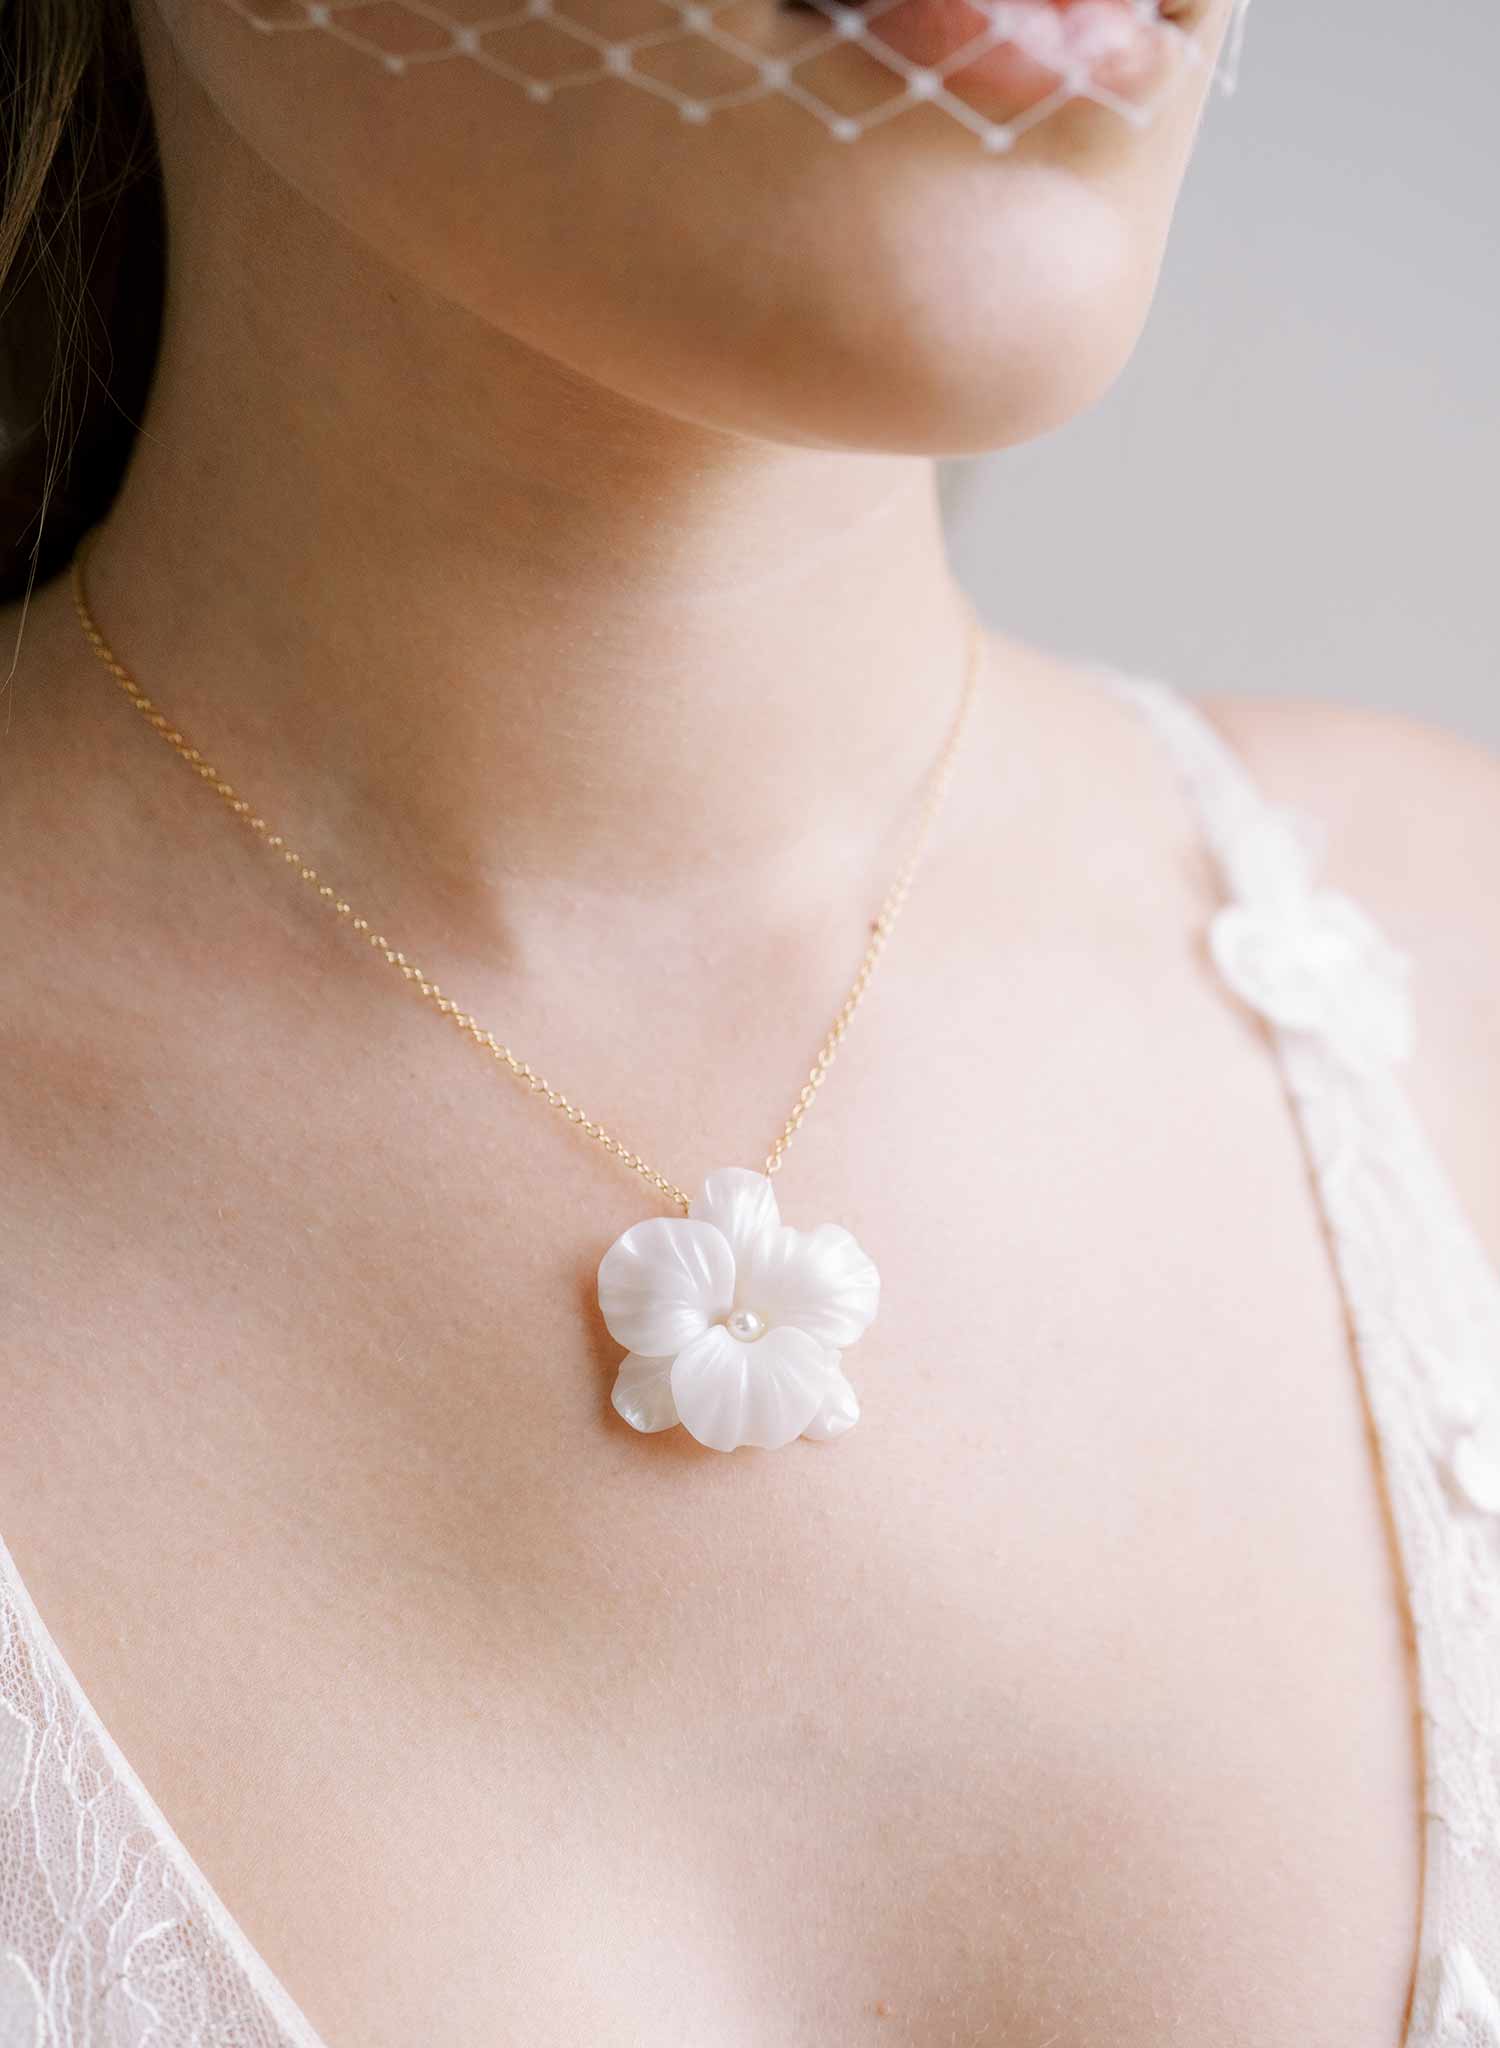 Simple orchid bridal necklace - Style #2420